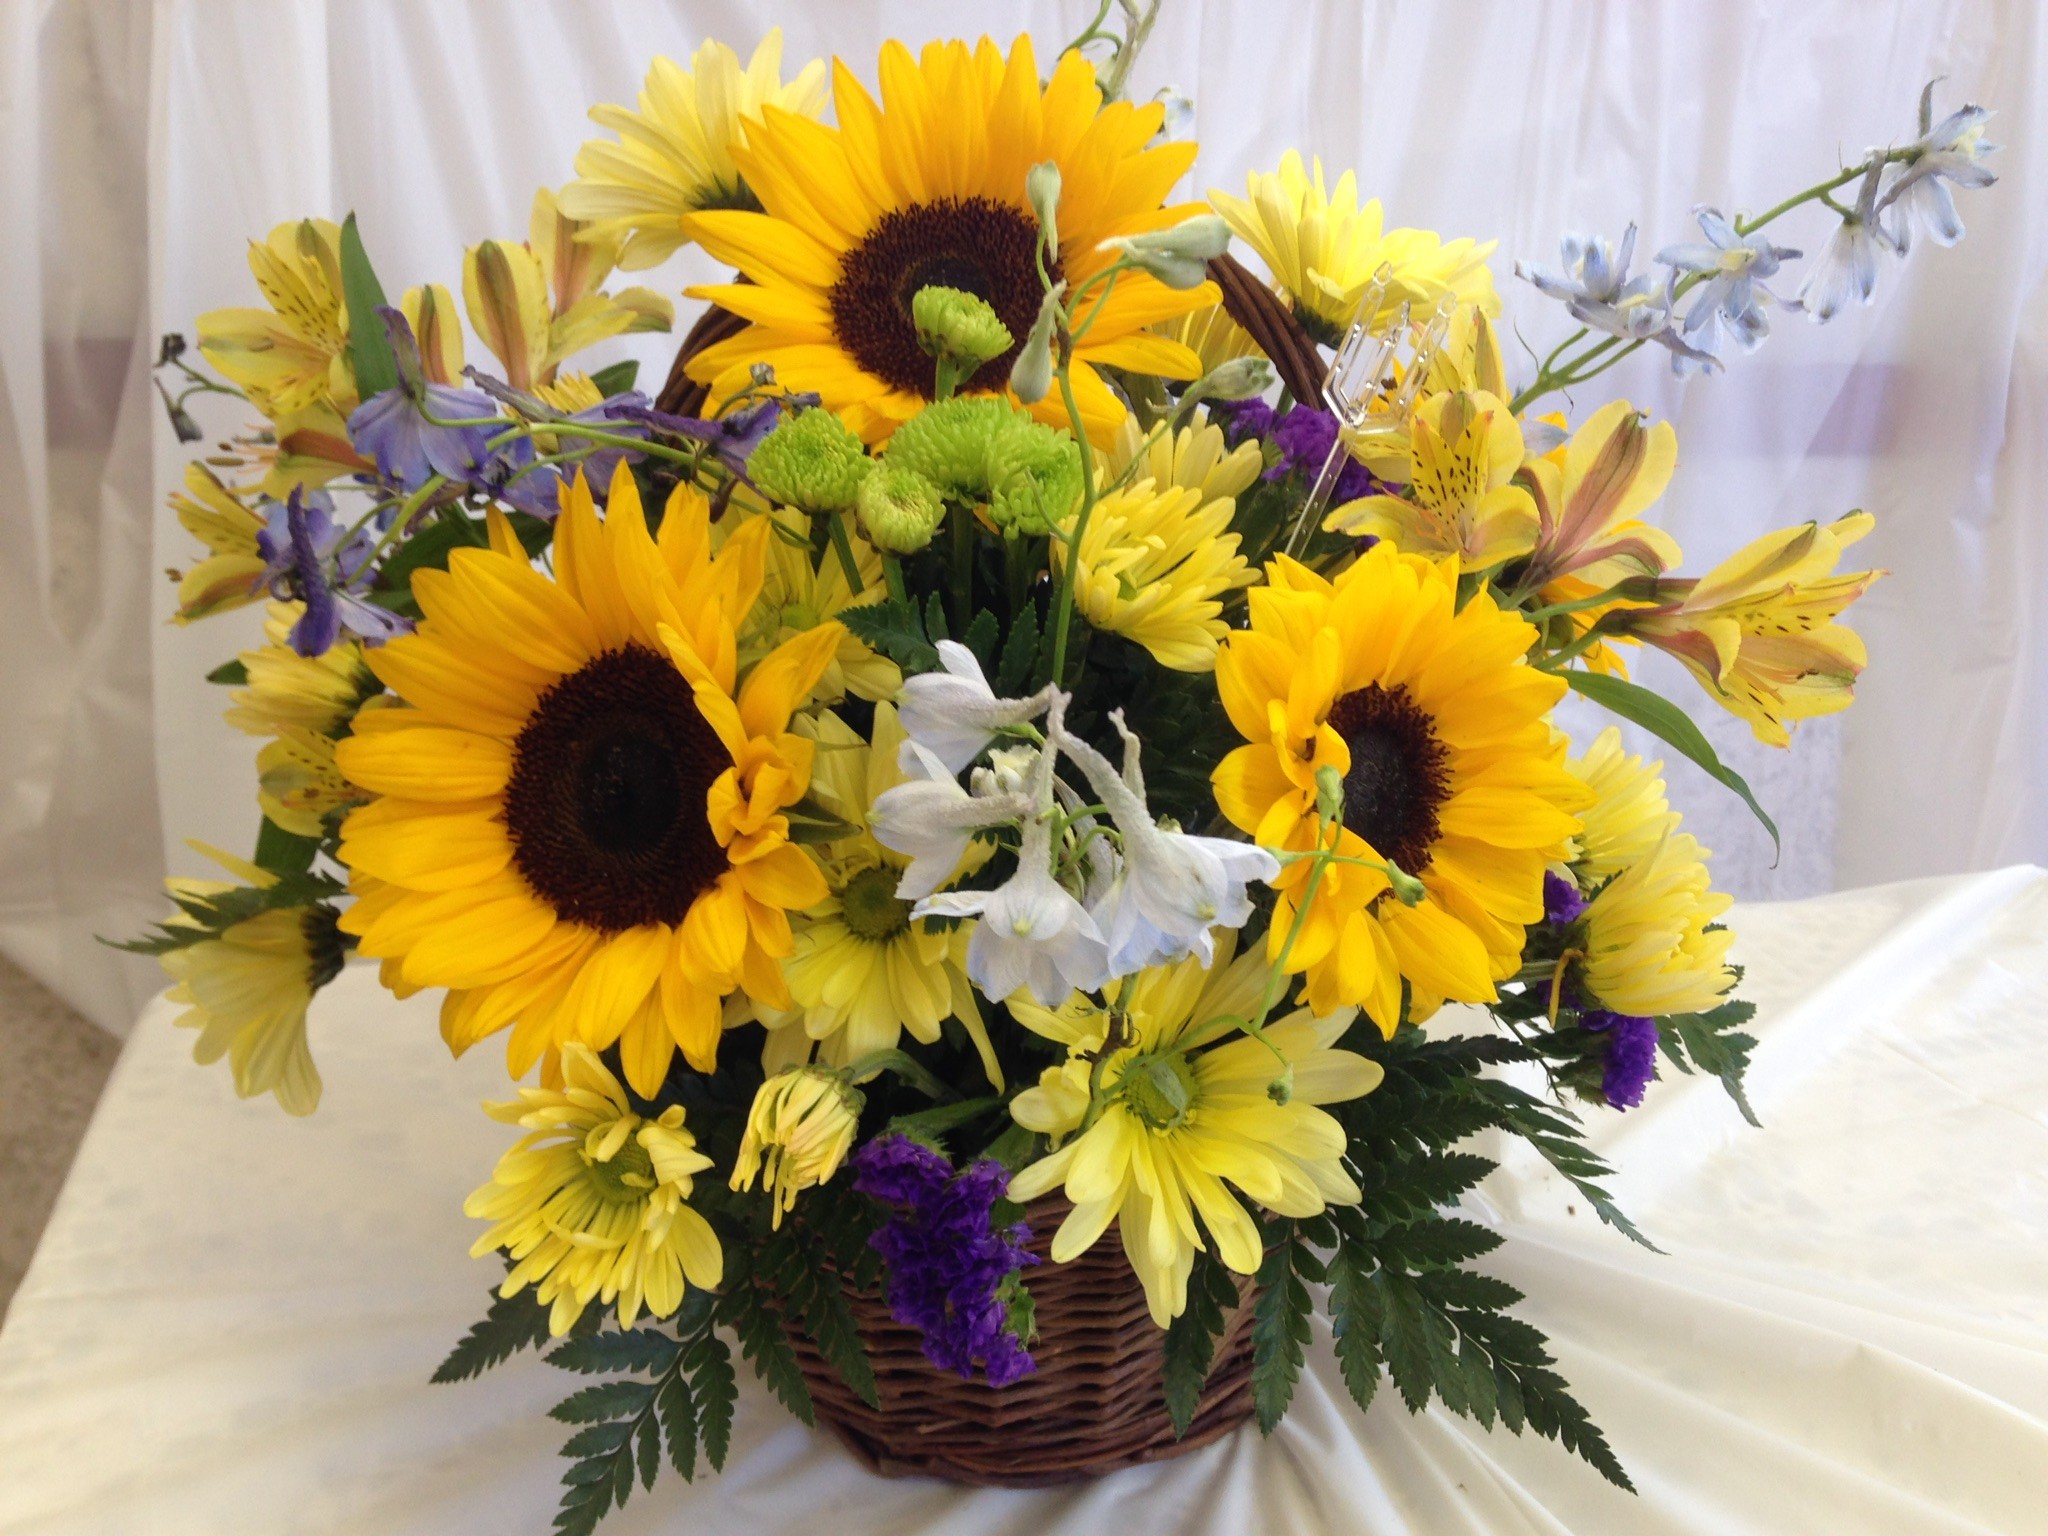 Basket of sunflowers and other bright flowers in Bristol, PA ...